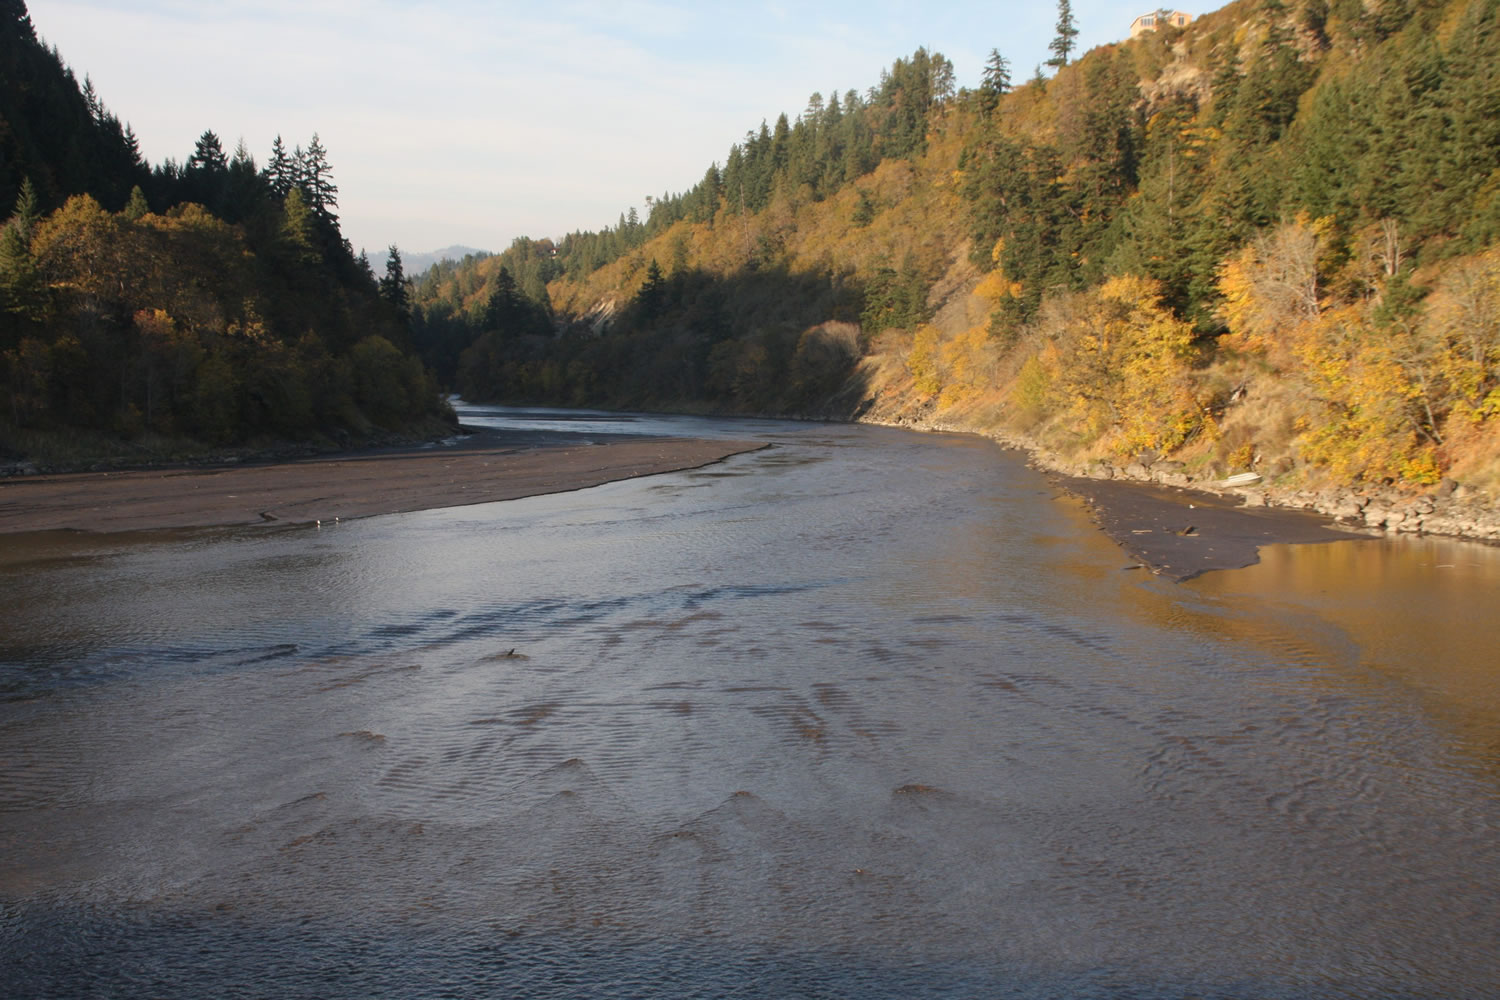 Here's a view of the mouth of the White Salmon River from the state Highway 14 bridge on Wednesday afternoon.